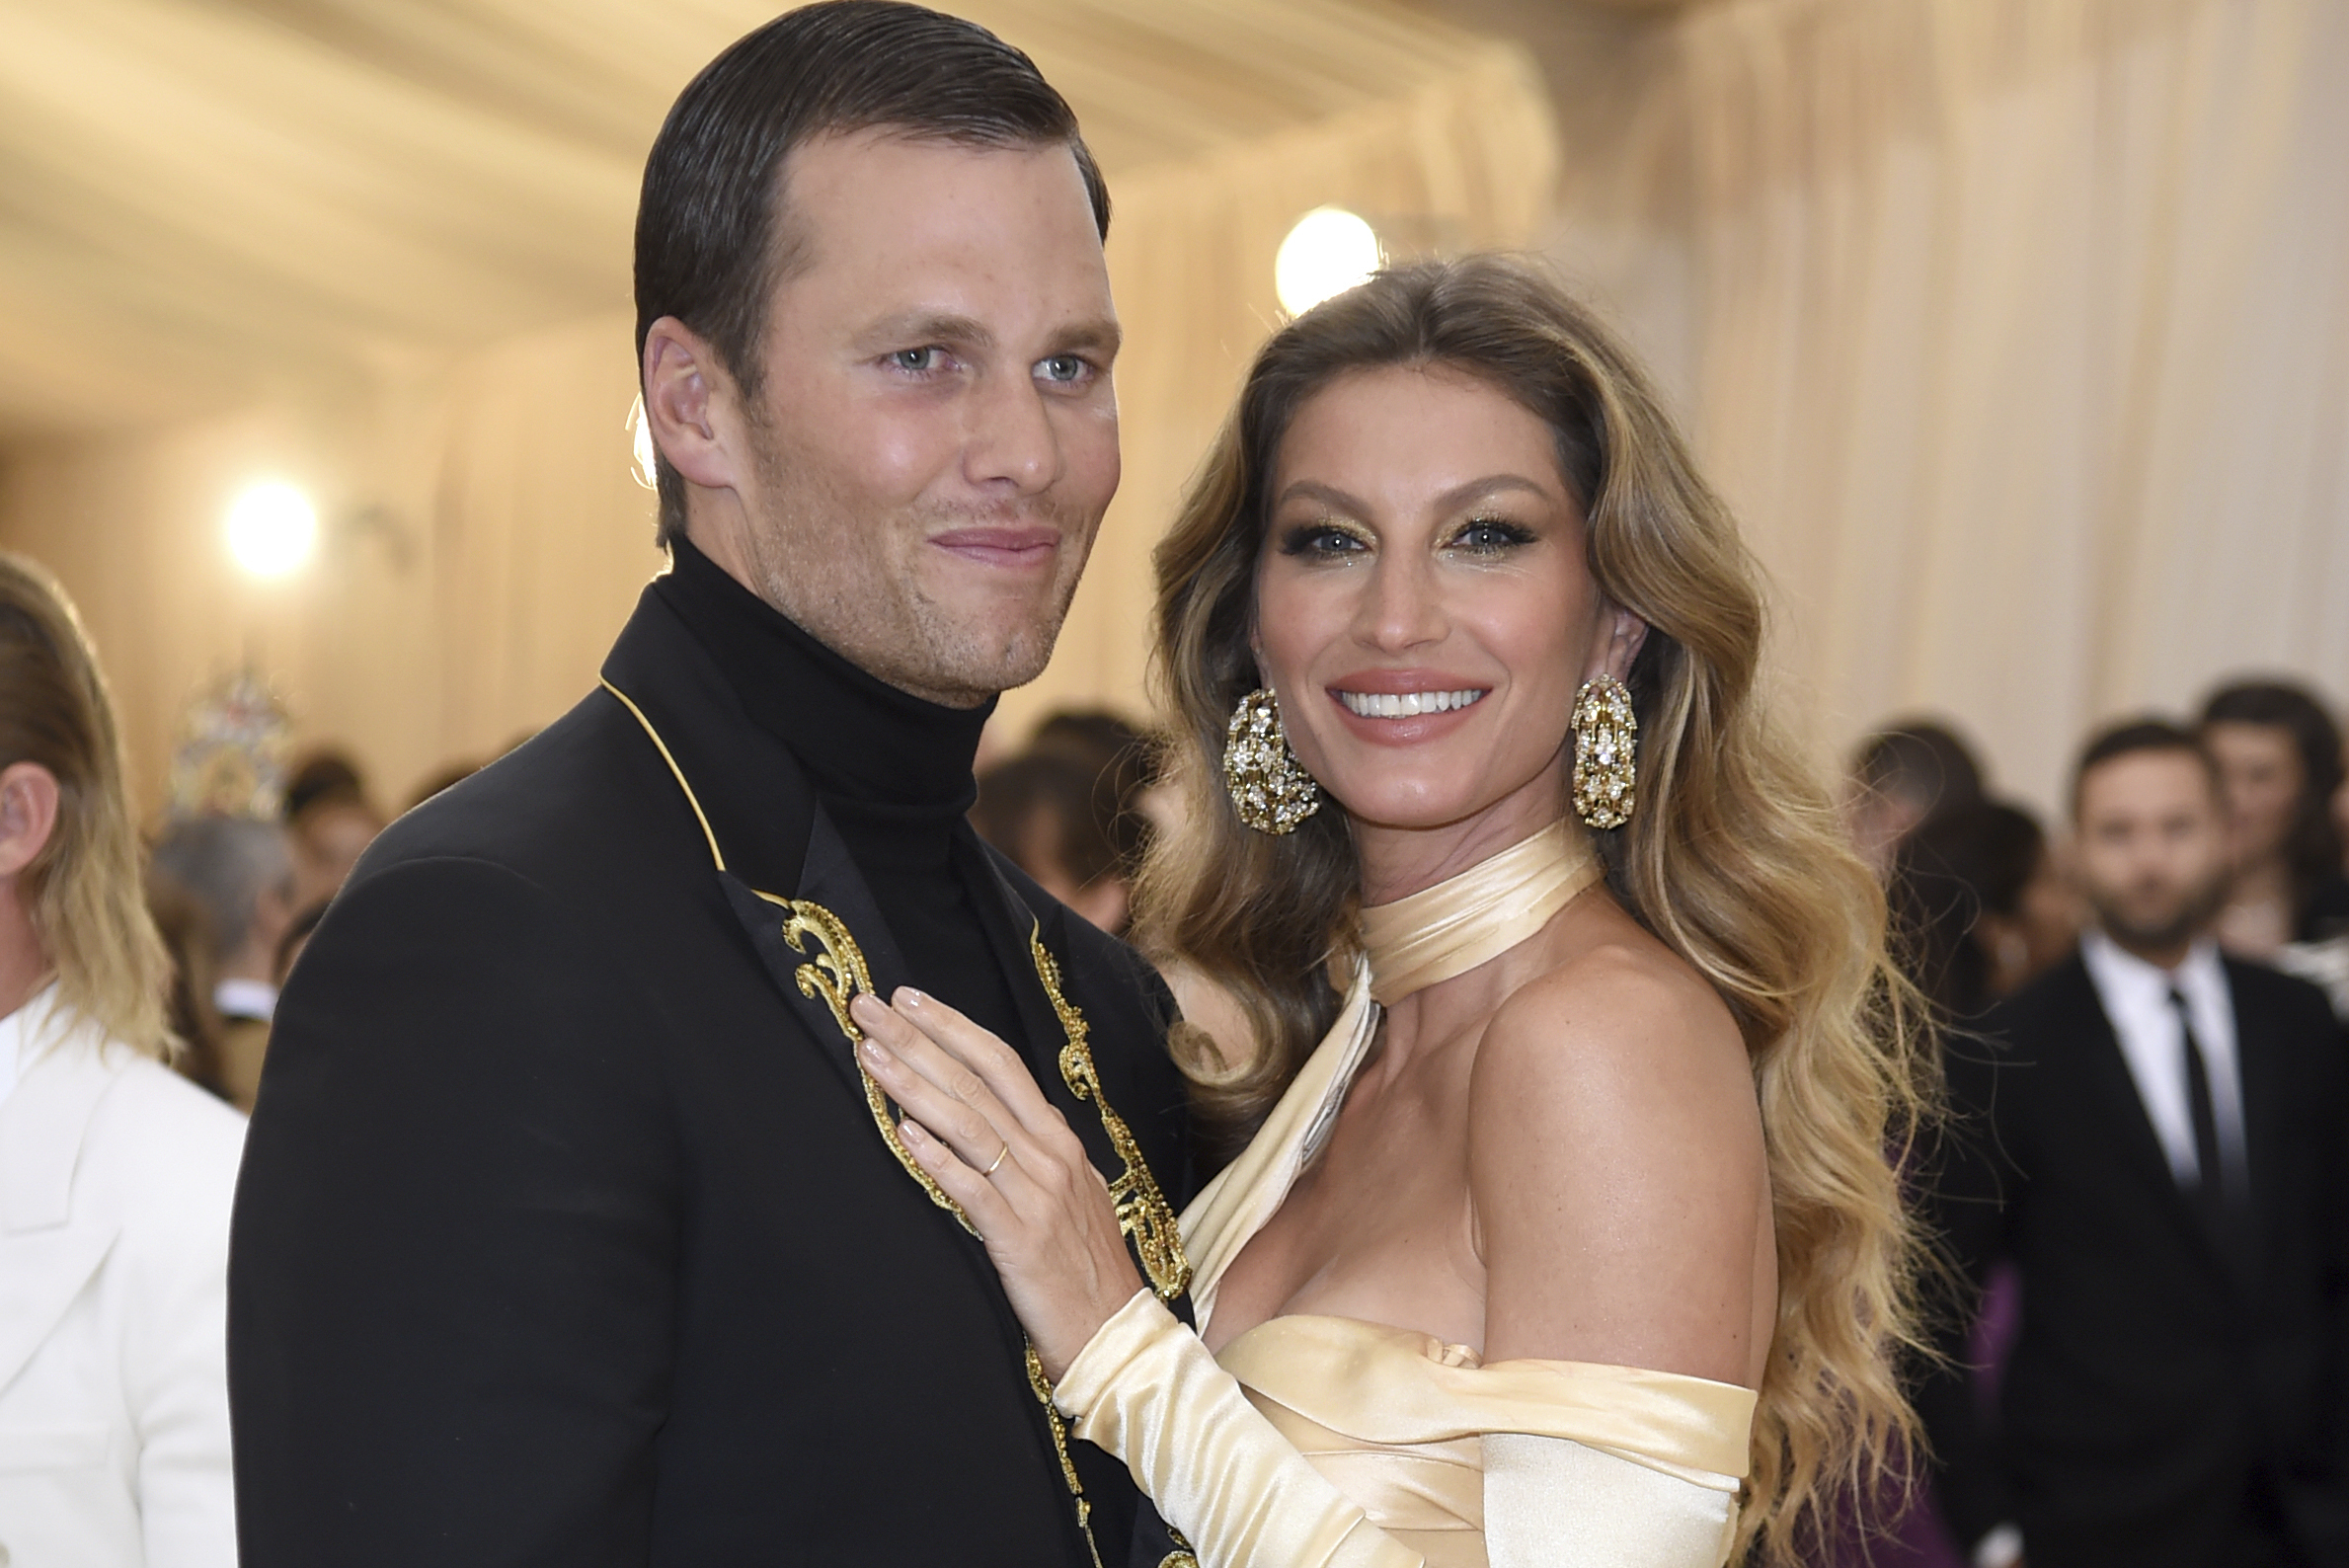 Tom Brady Says Wife Gisele Bundchen 'Wasn't Satisfied with Our Marriage', News, Scores, Highlights, Stats, and Rumors